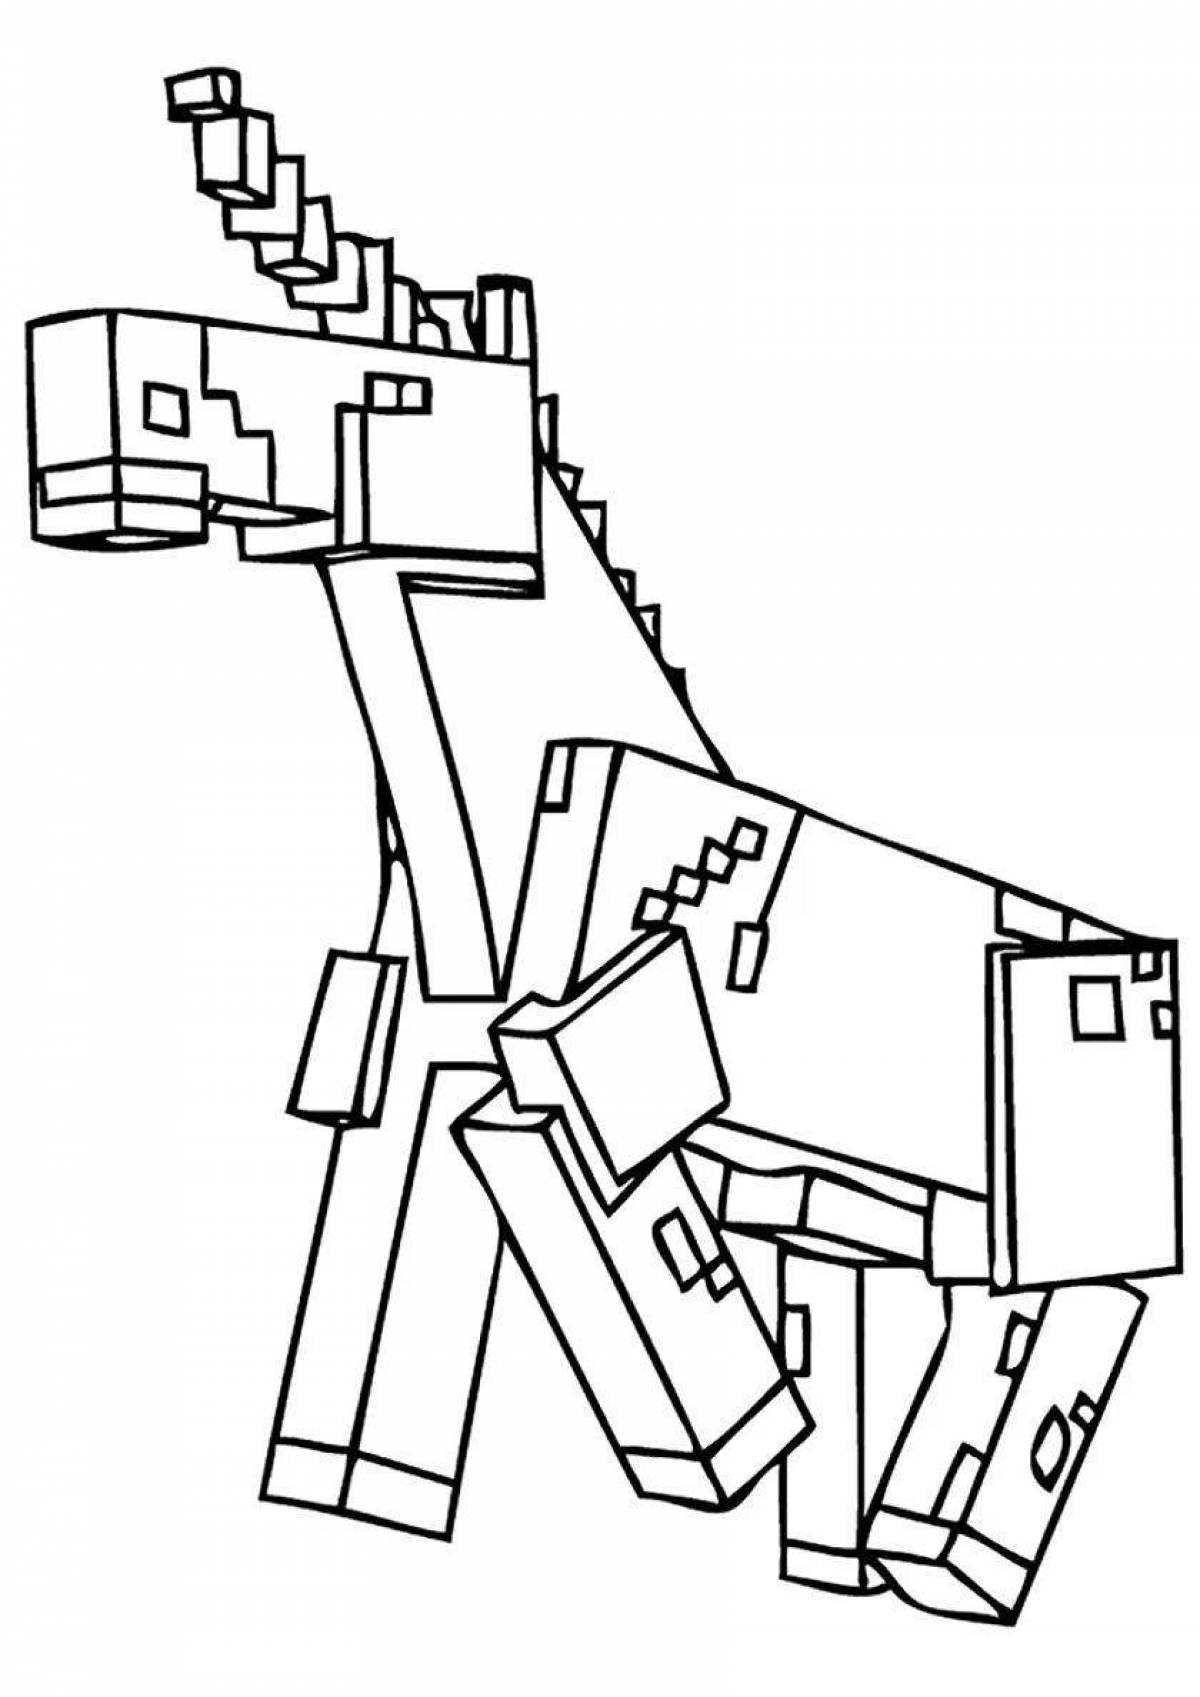 Animated minecraft gripper coloring page